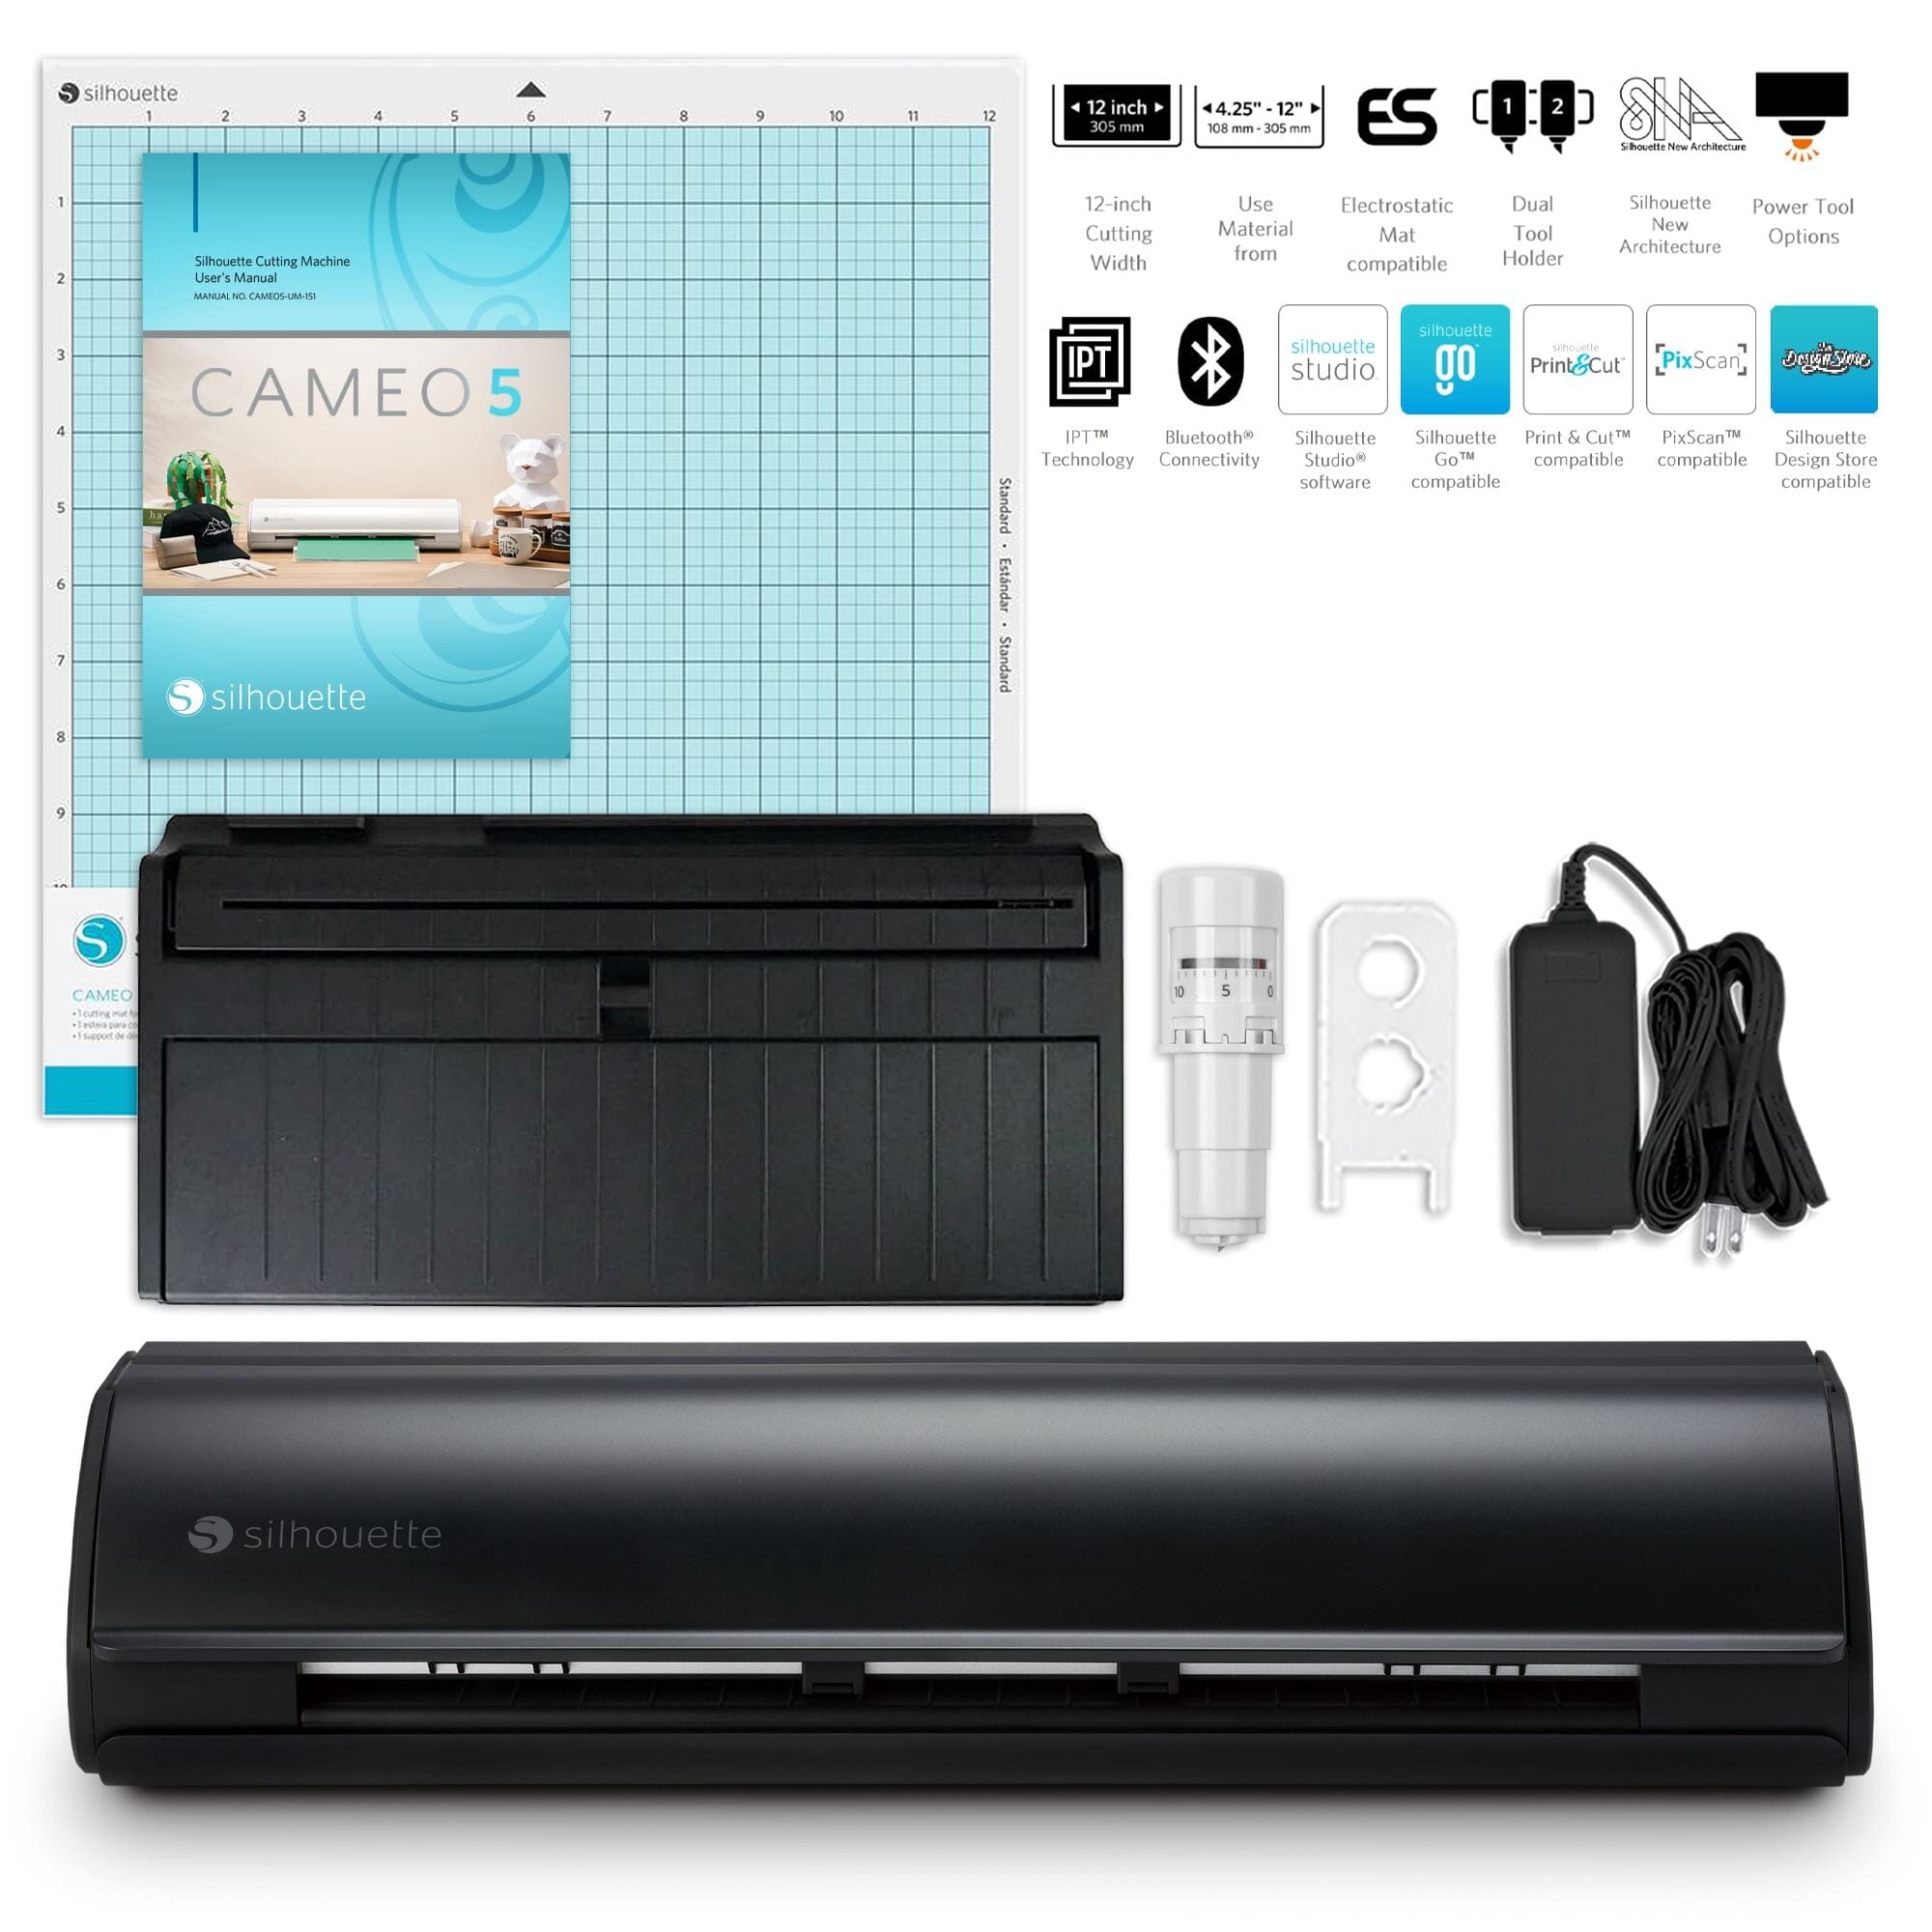 Which would be better for the price for a hobbyist? Silhouette cameo 4 or  cricut maker. : r/cricut